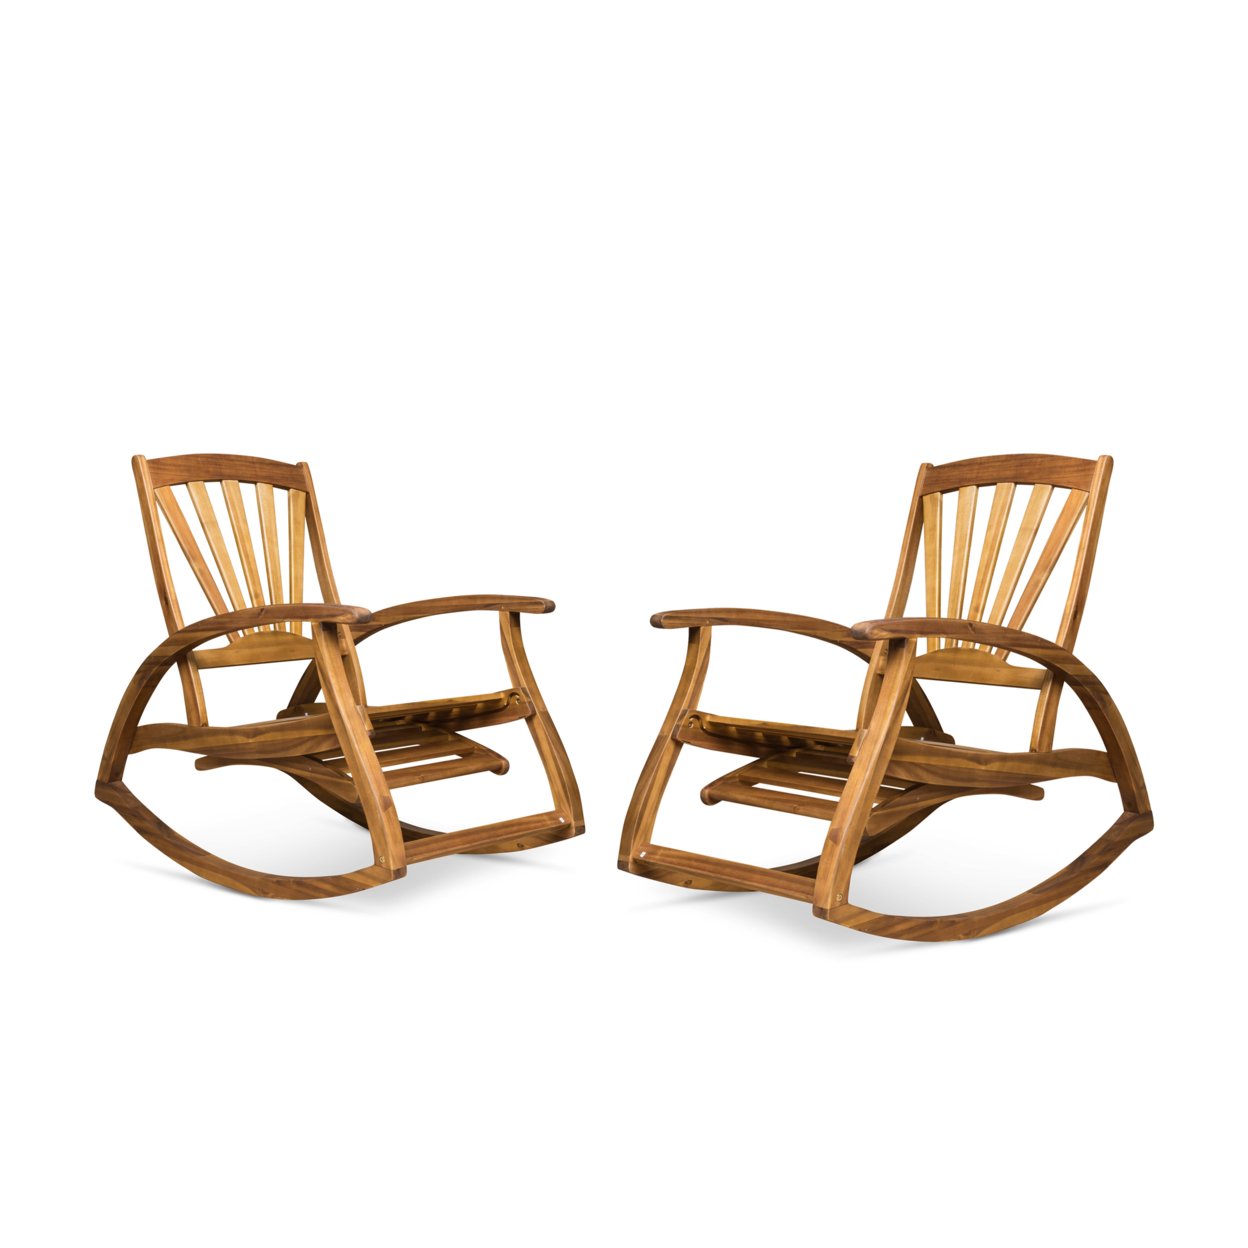 Lee Outdoor Rustic Acacia Wood Recliner Rocking Chairs (Set Of 2) - Gray